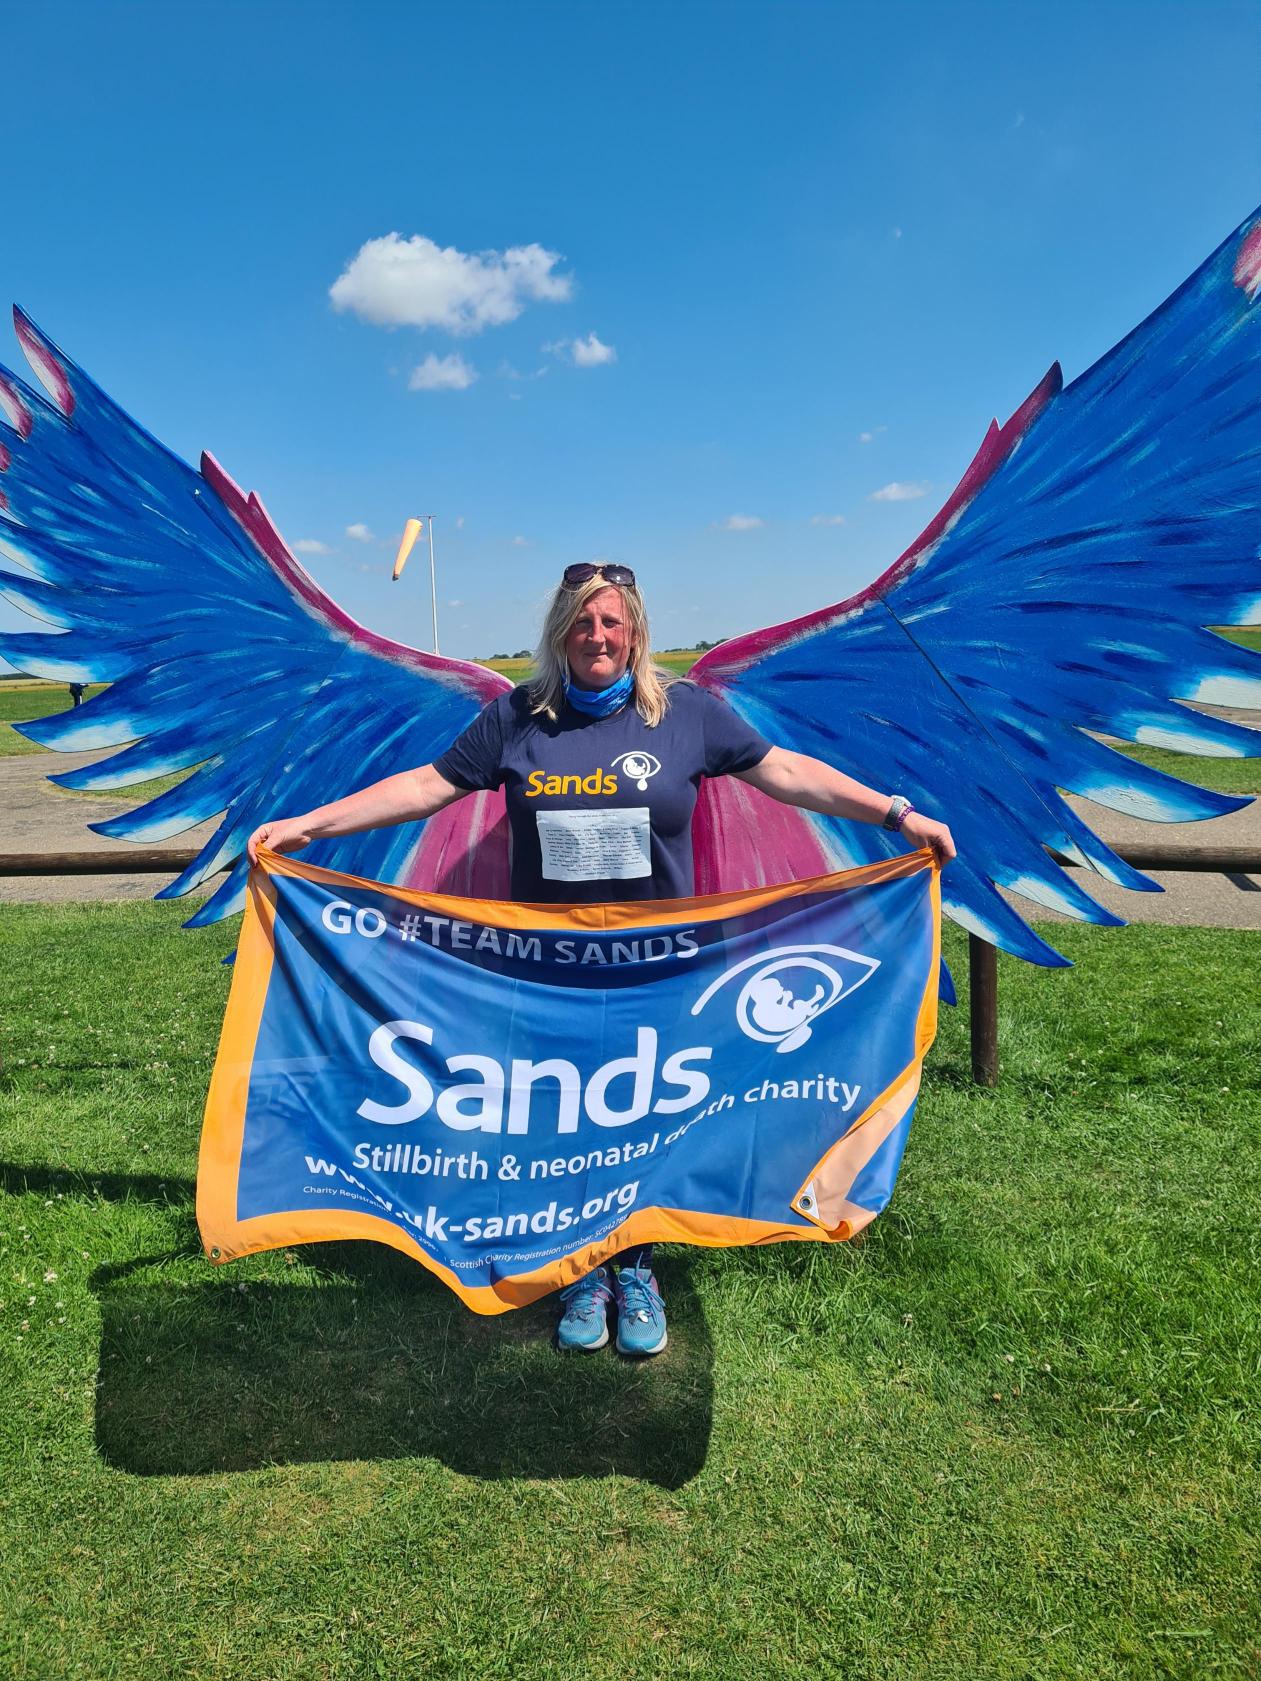 Person holding Sands flag in front of wings